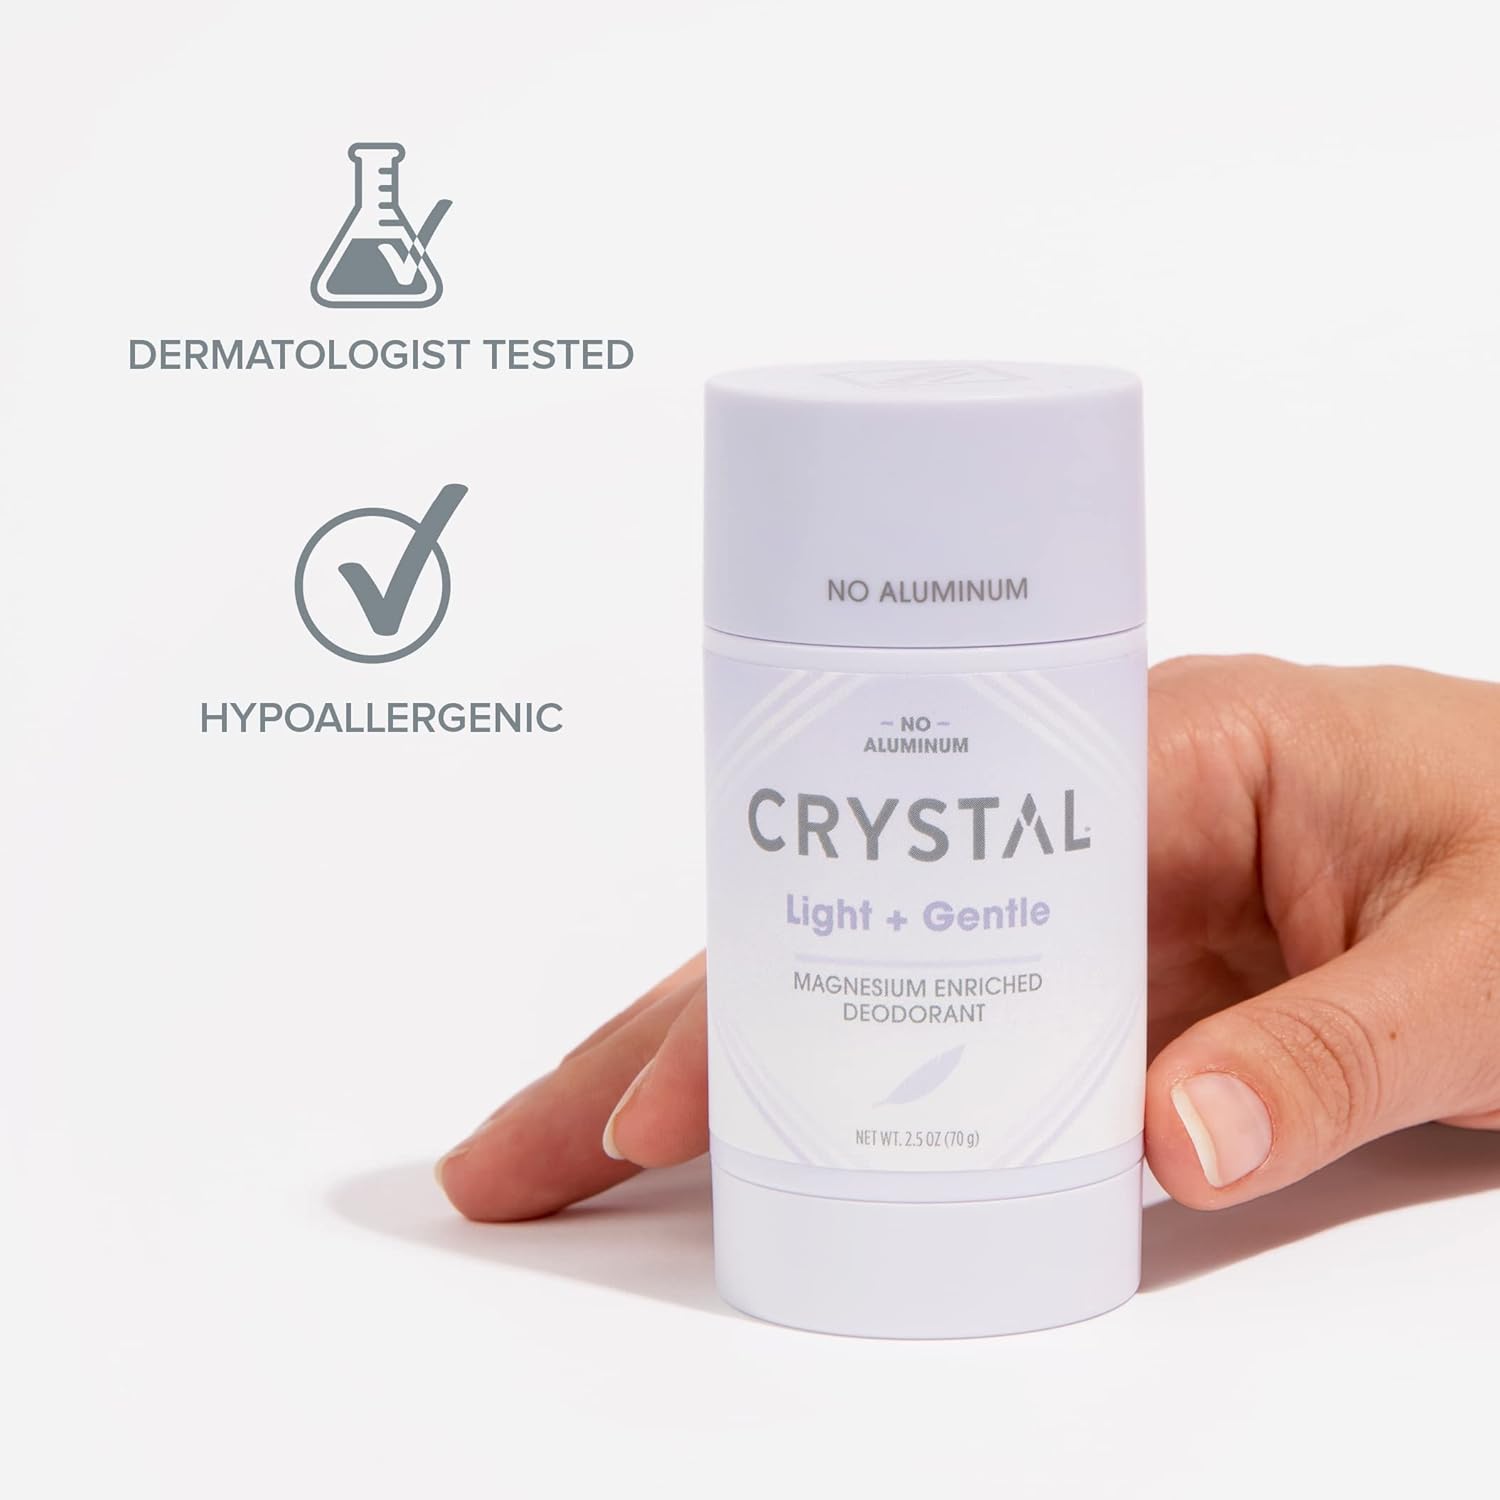 Crystal Magnesium Solid Stick Natural Deodorant, Non-Irritating Aluminum Free Deodorant for Men or Women, Safely and Effectively Fights Odor, Baking Soda Free,Light + Gentle (2.5 oz) : Beauty & Personal Care